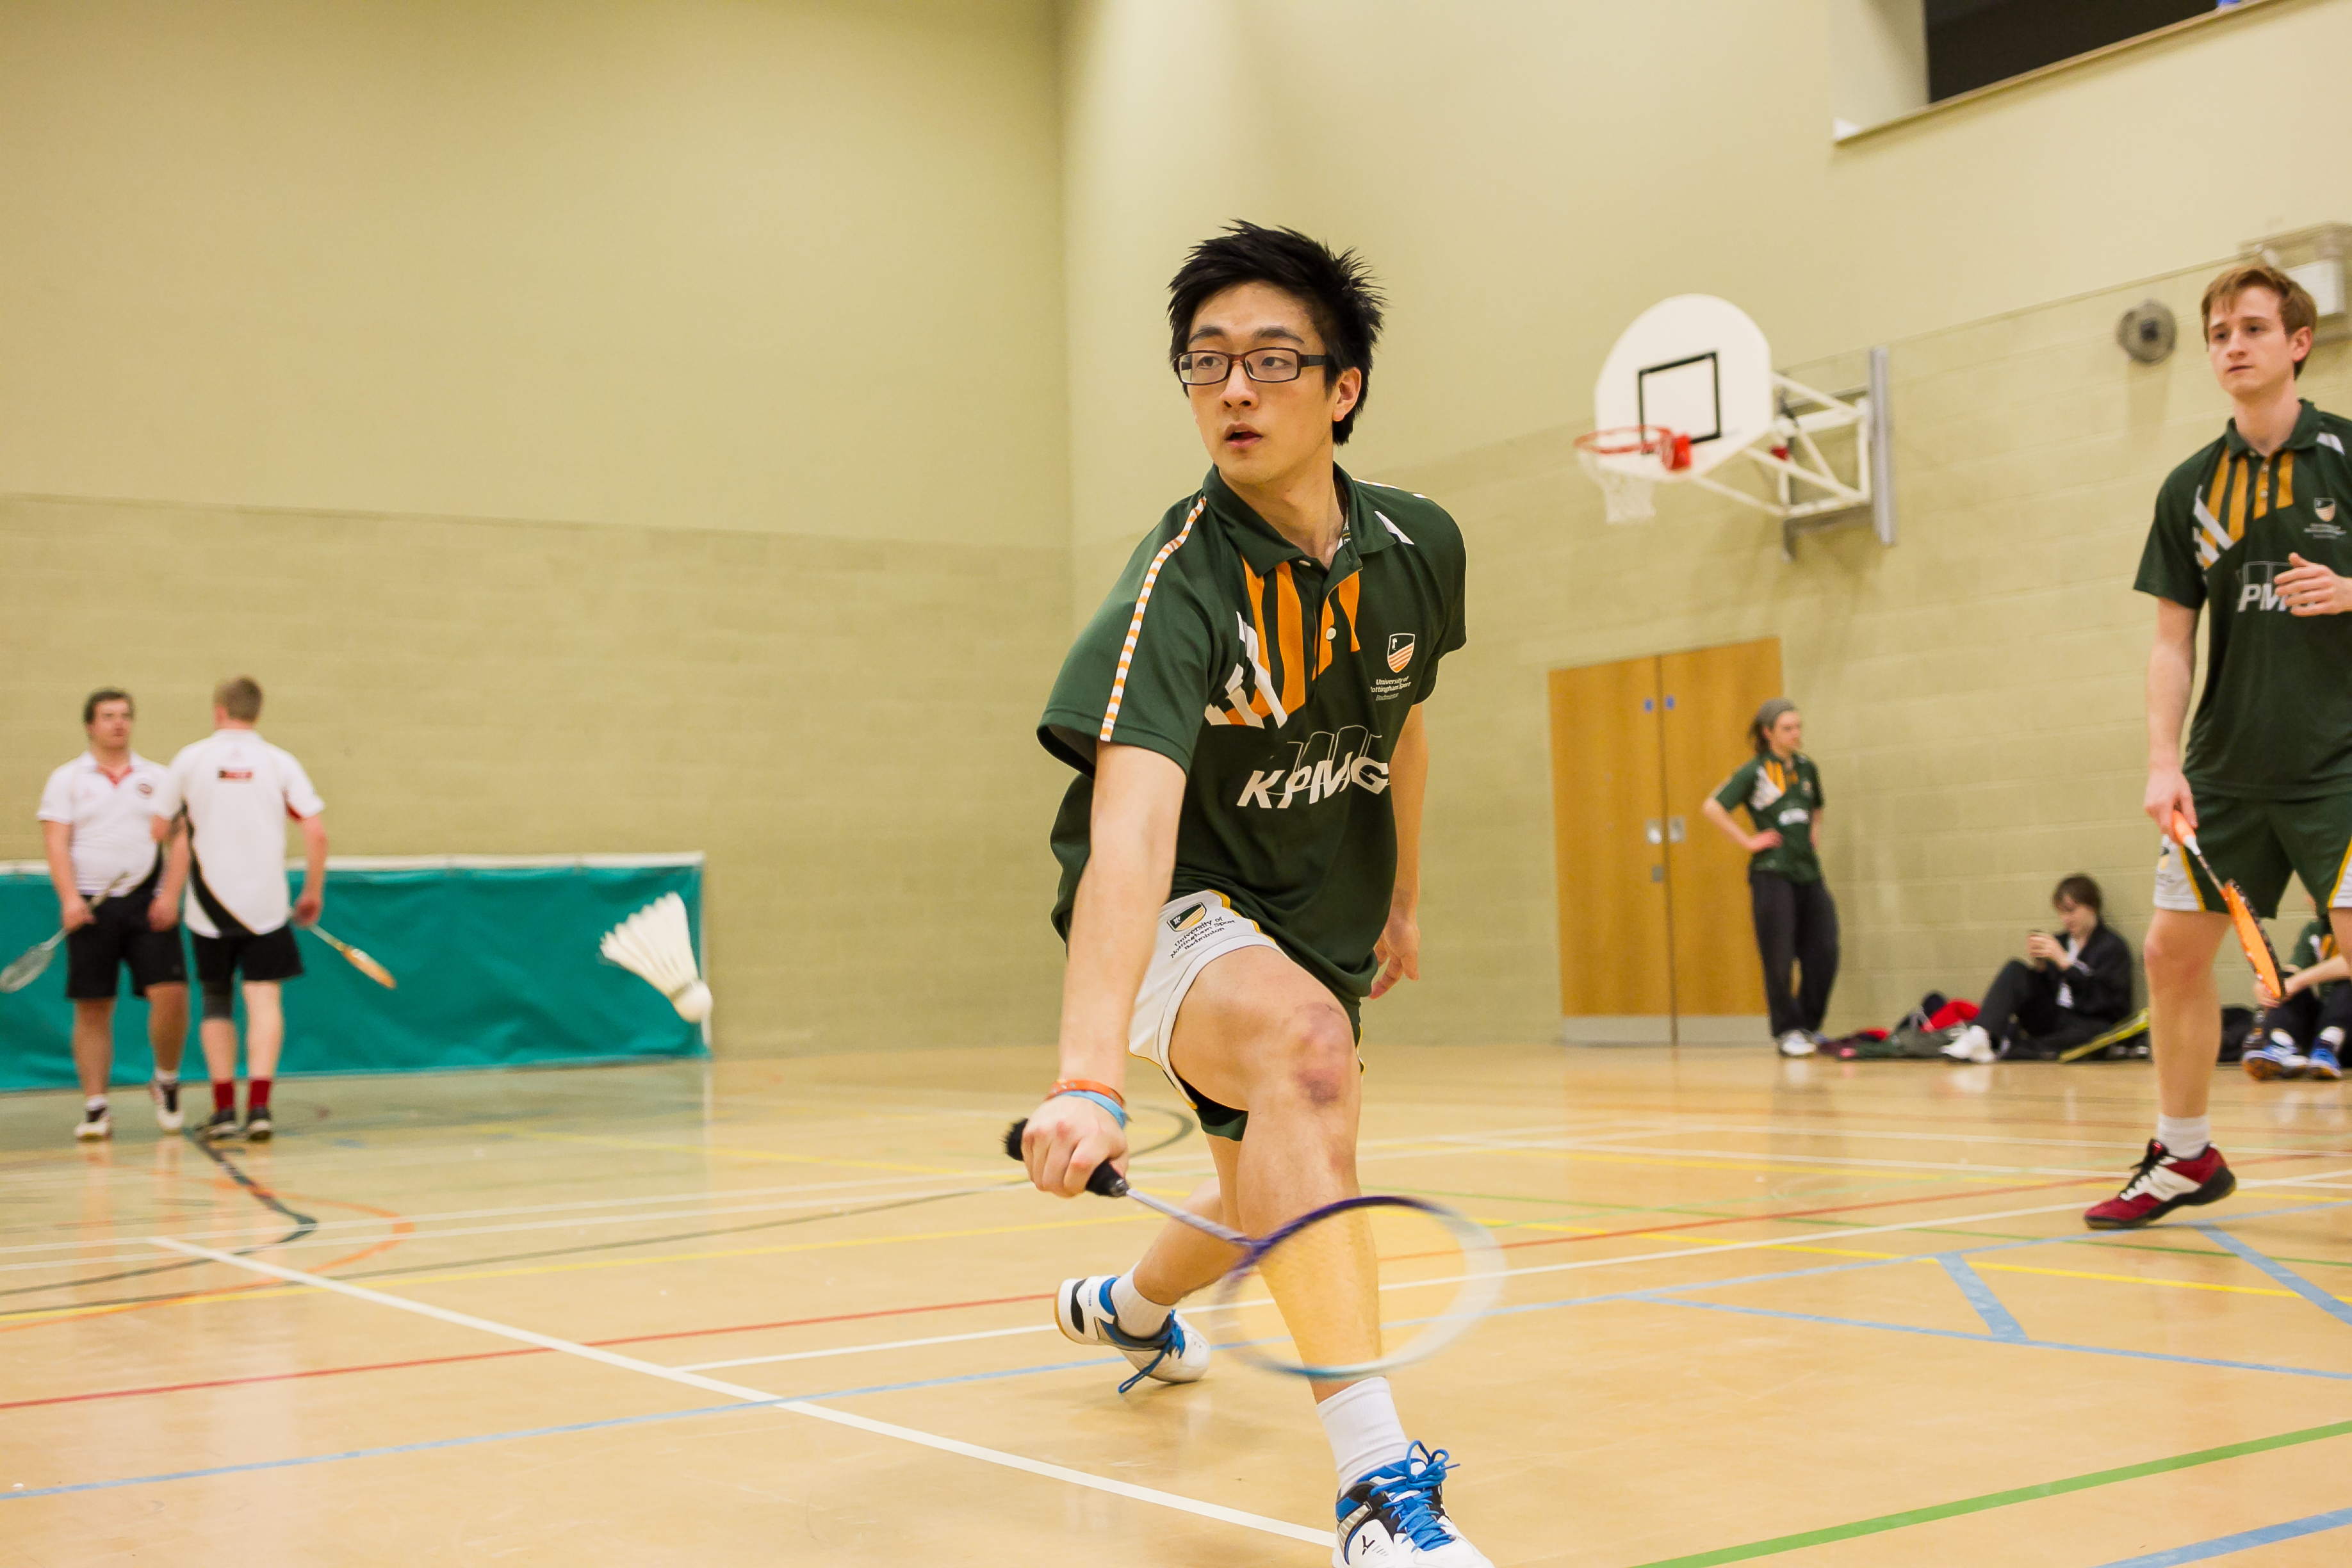 The Men's 1st and 2nd Badminton teams both recorded 8-0 wins this Wednesday.